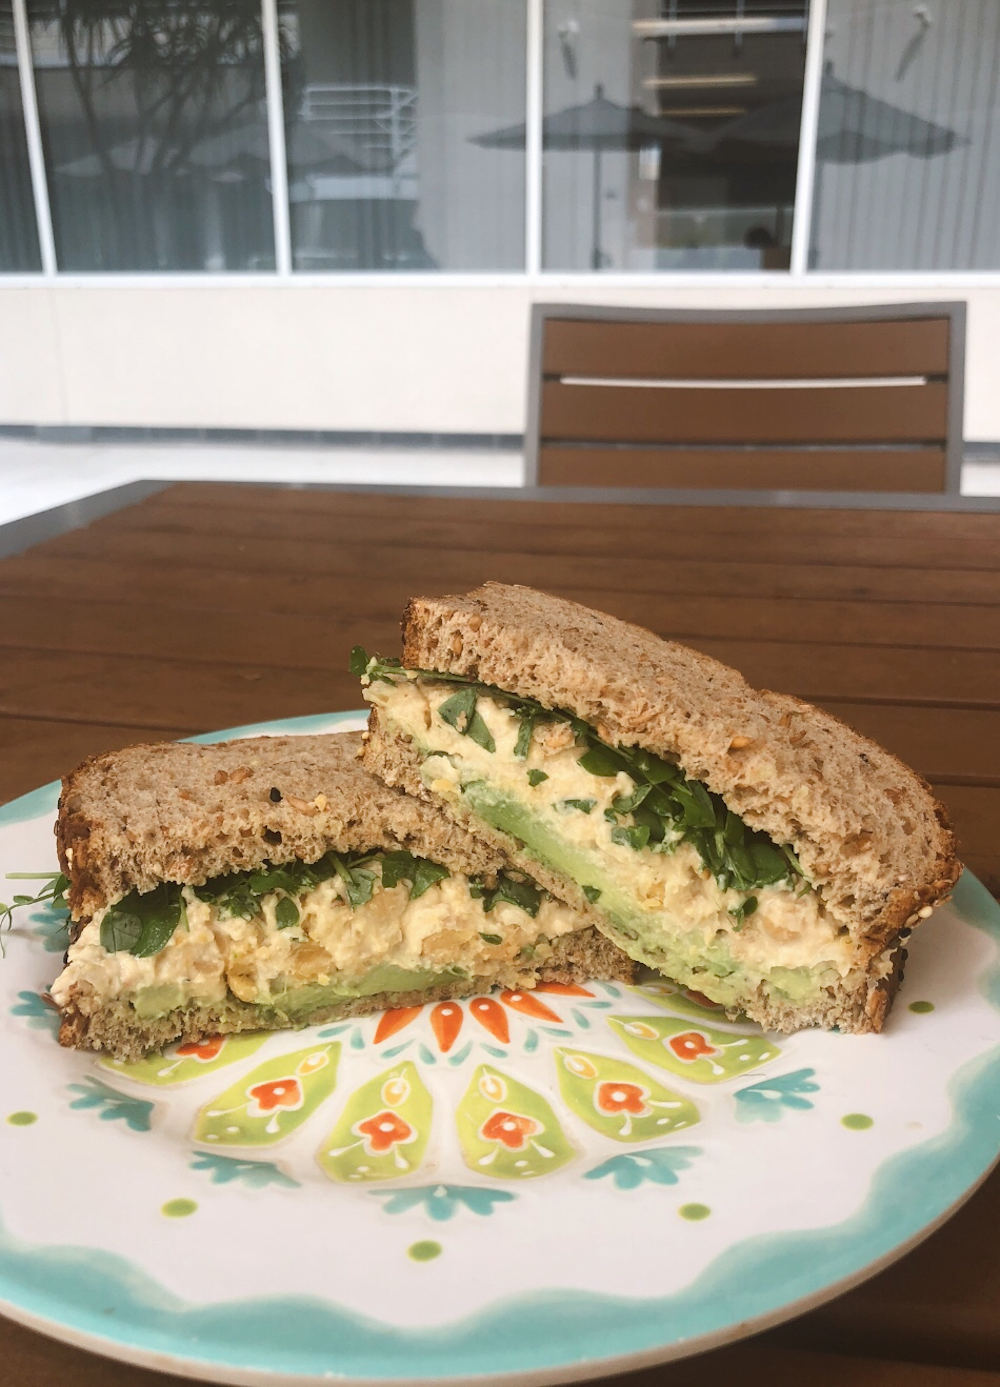 Final product: Chickpea salad sandwiches